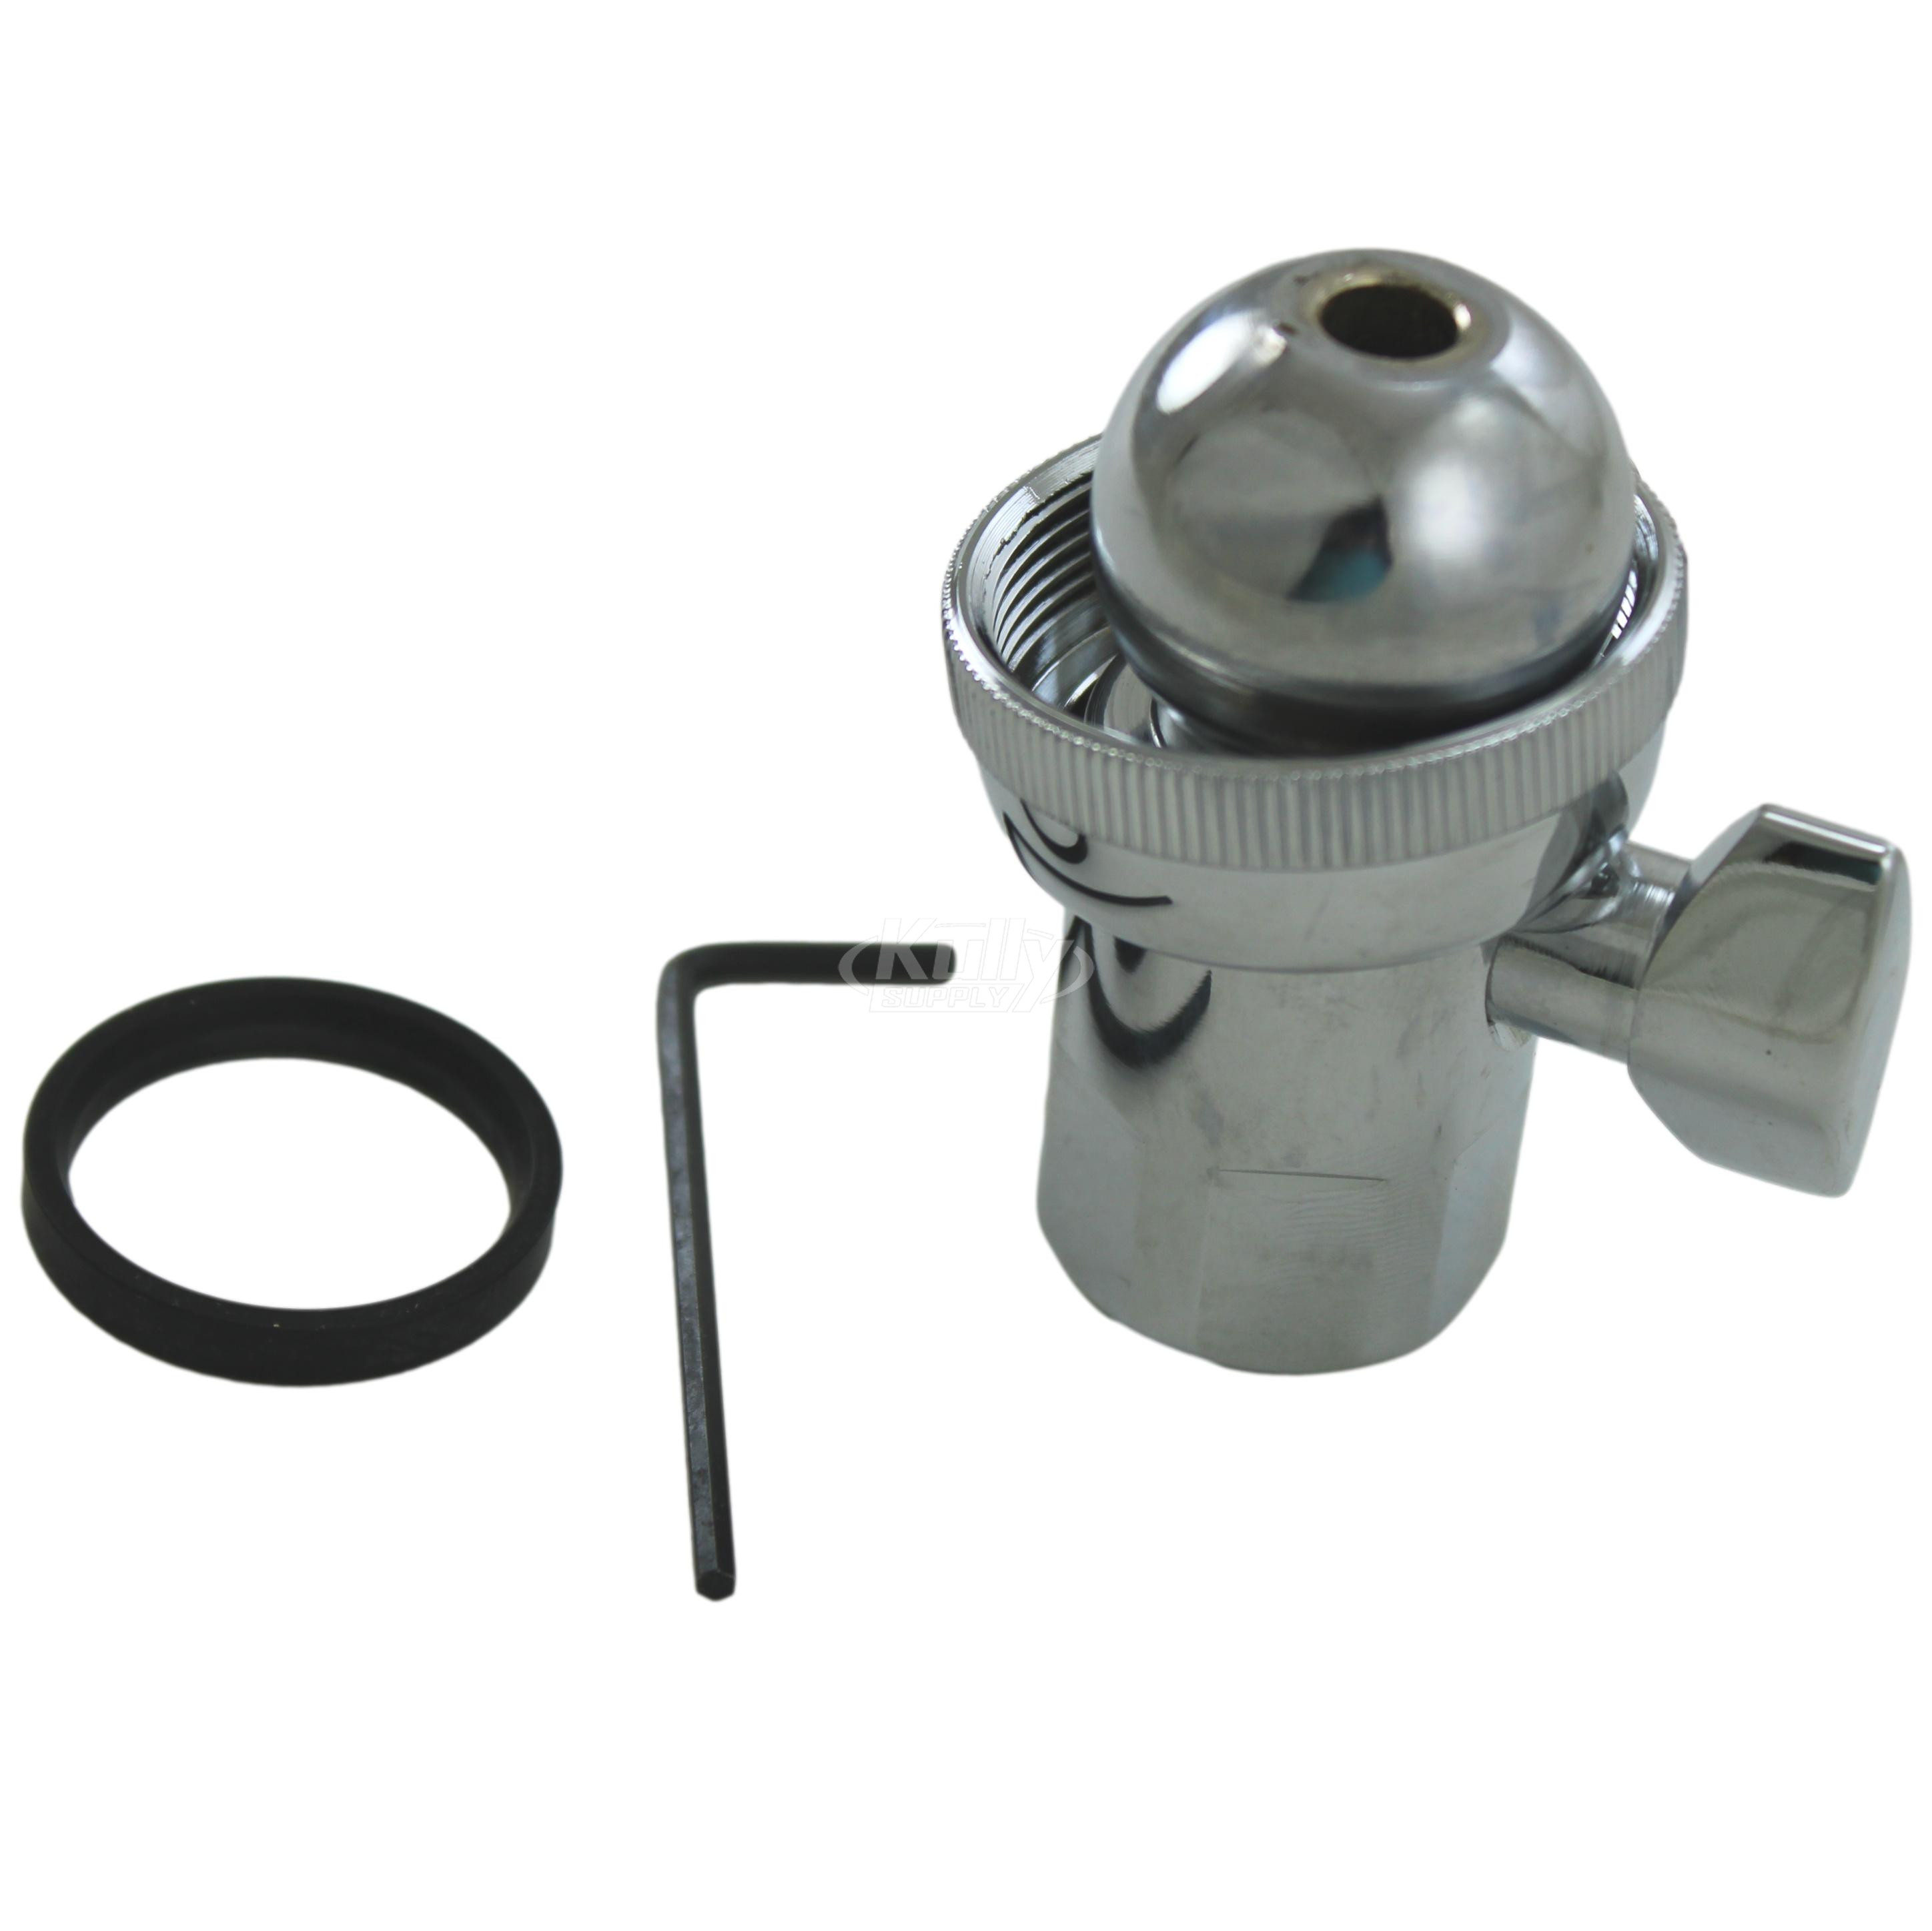 Sloan SH-1007-A Ball Joint Coupling Assembly (with Volume Control)